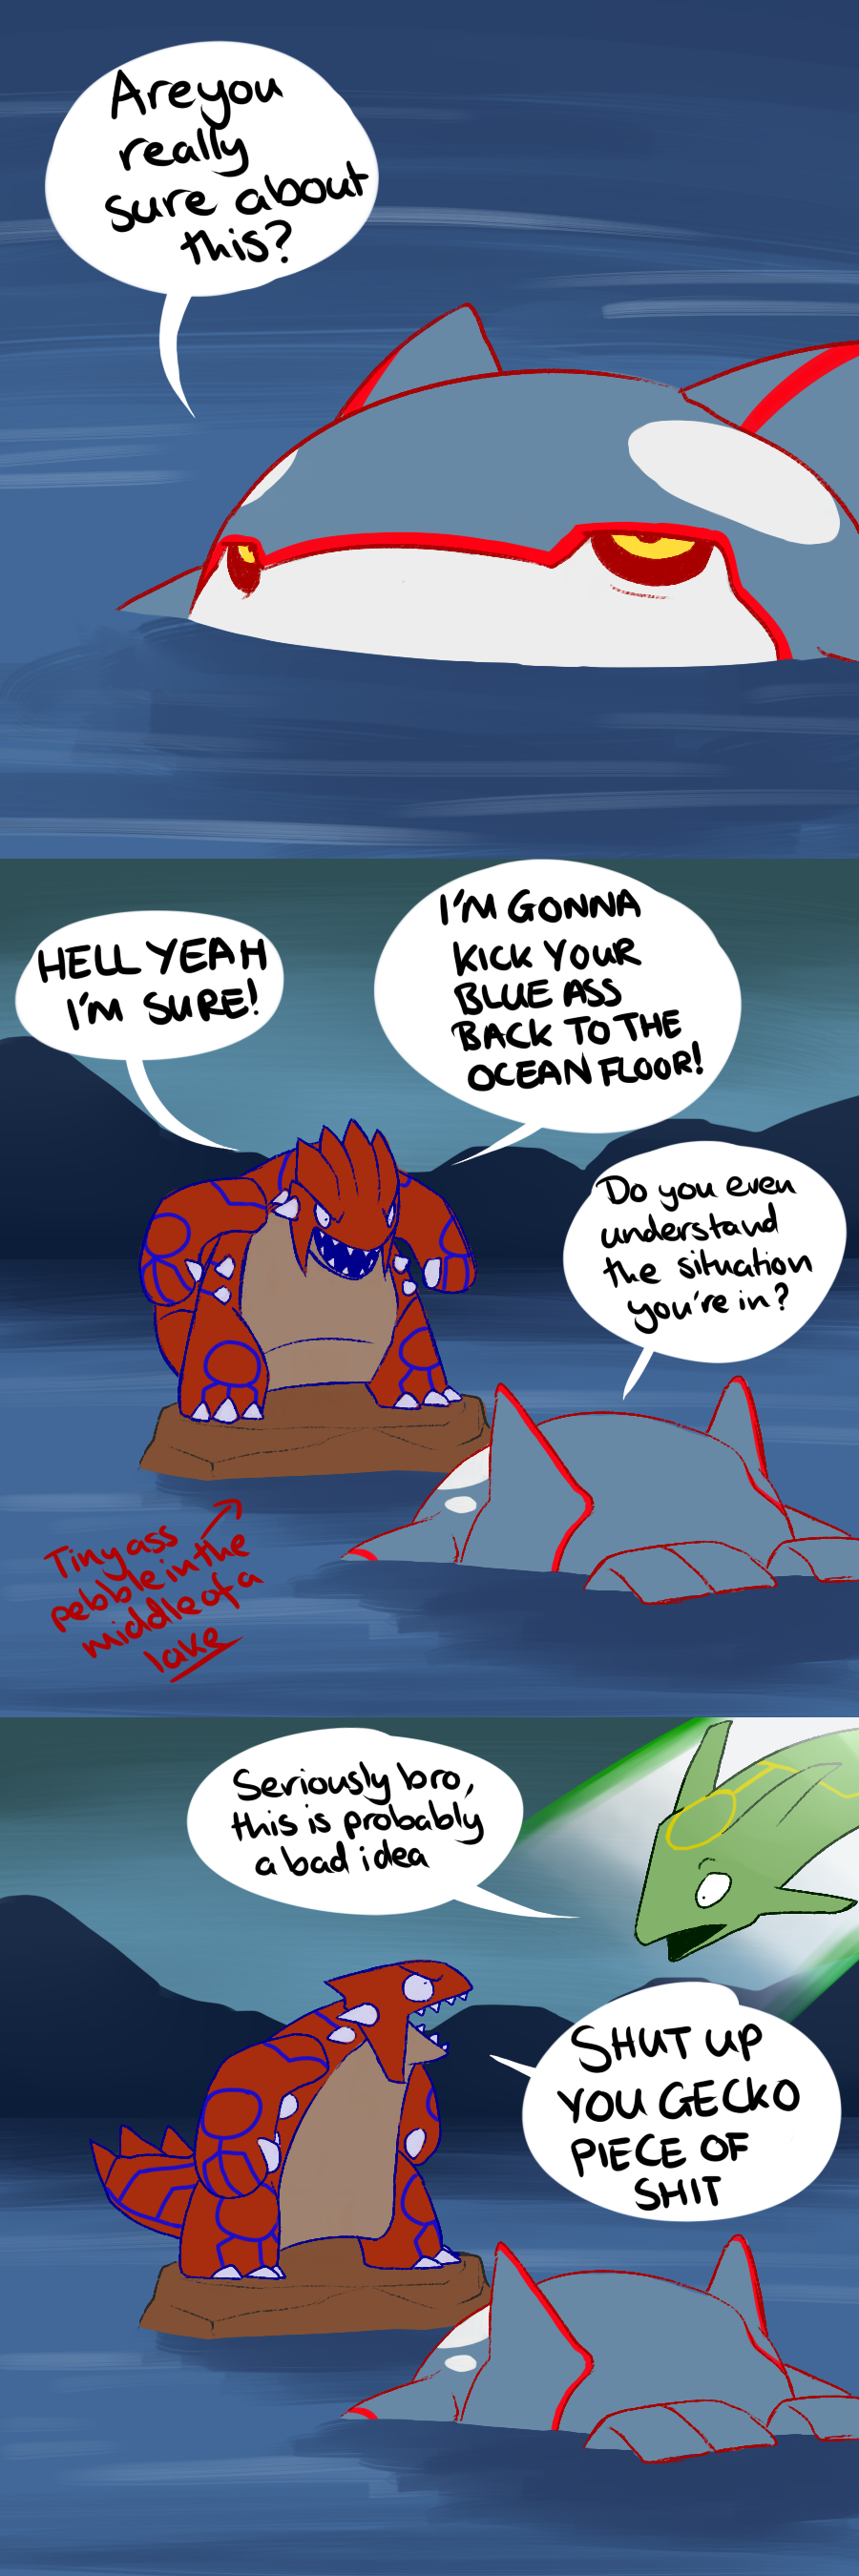 groudon_vs_kyogre_by_protocol00-d7hvc39.png